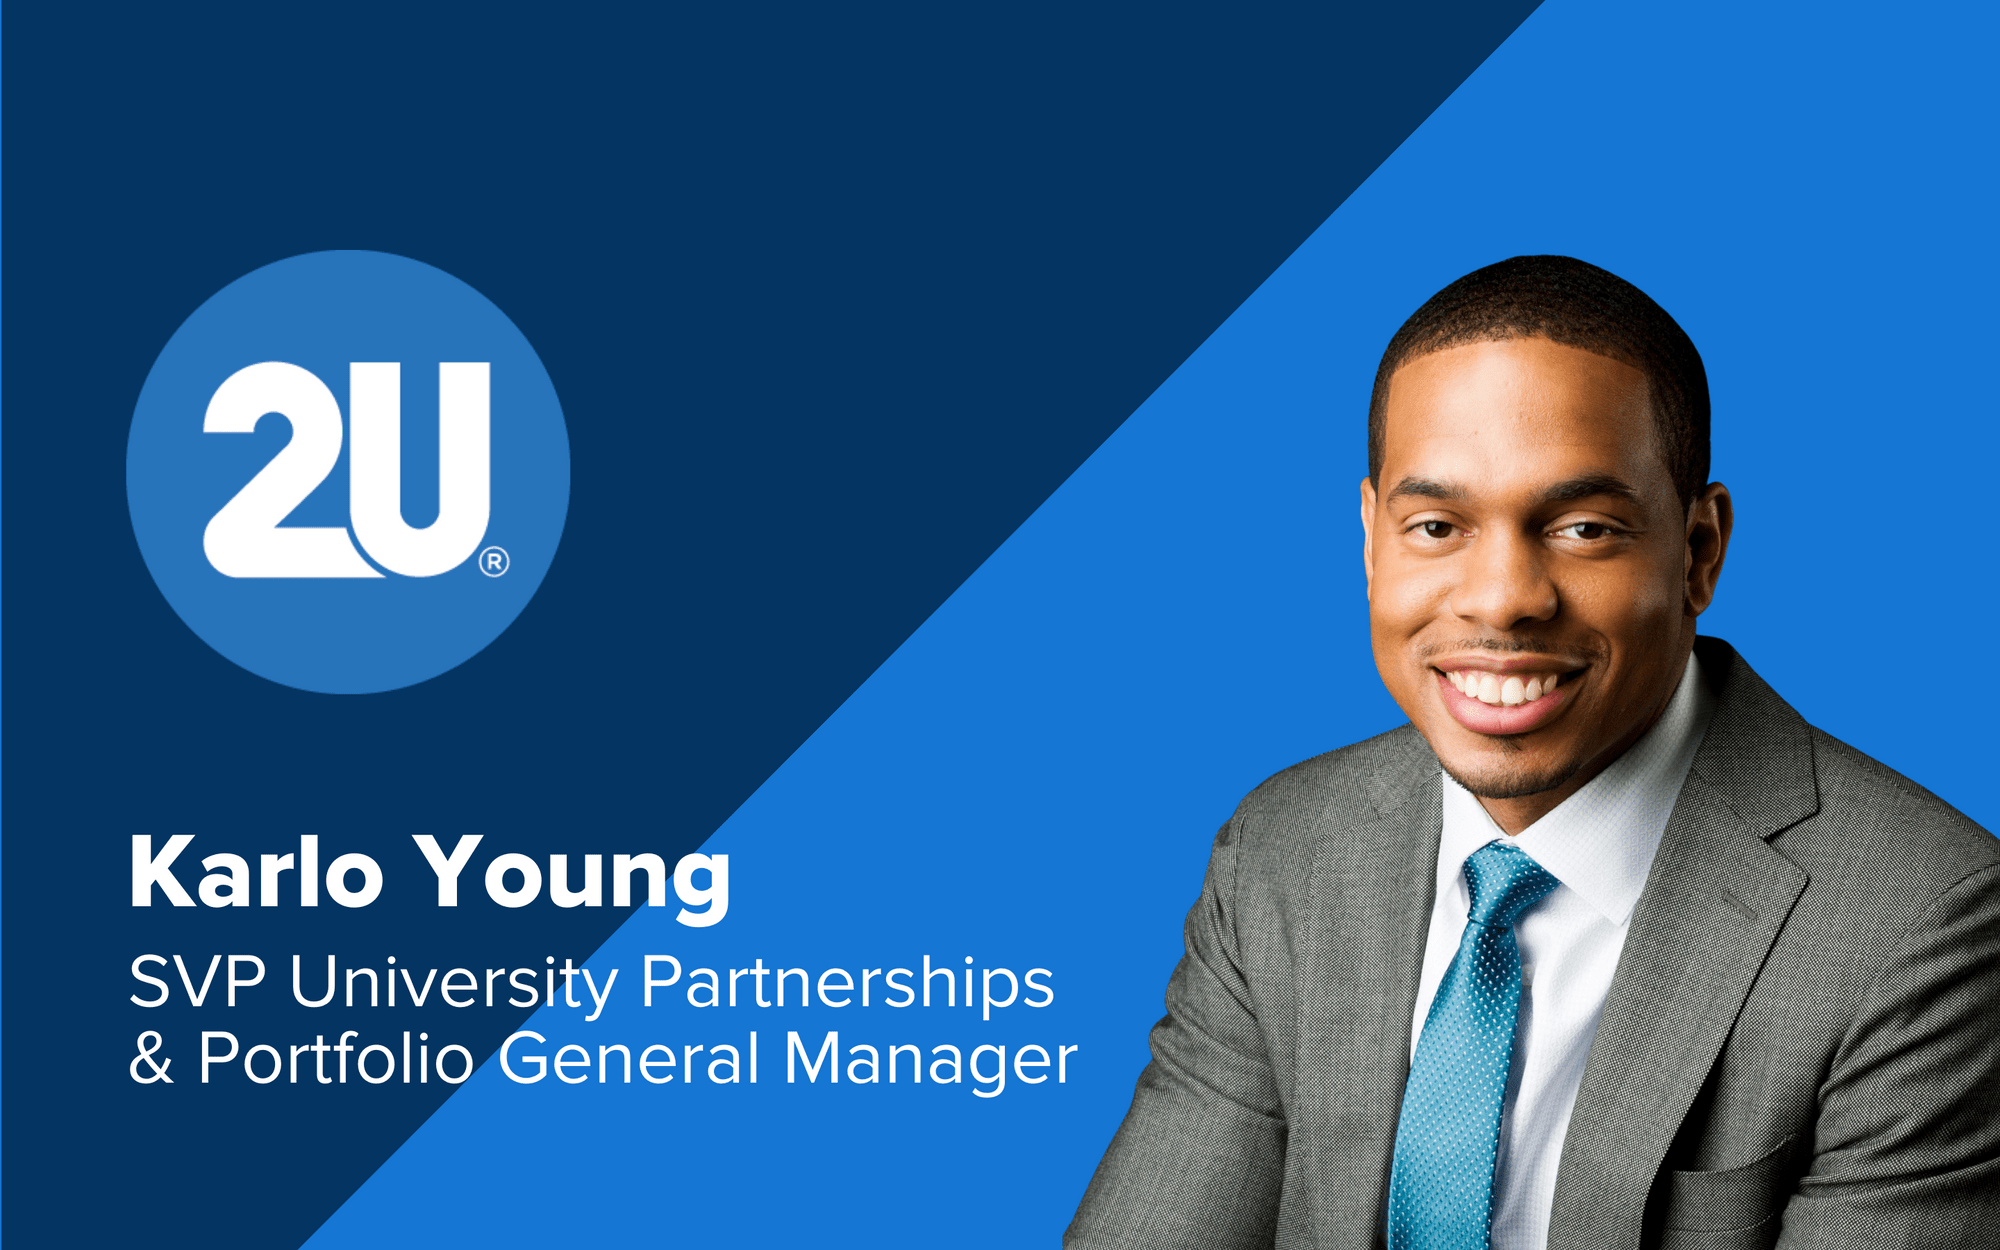 Karlo Young, SVP of University Partnerships and Portfolio General Manager